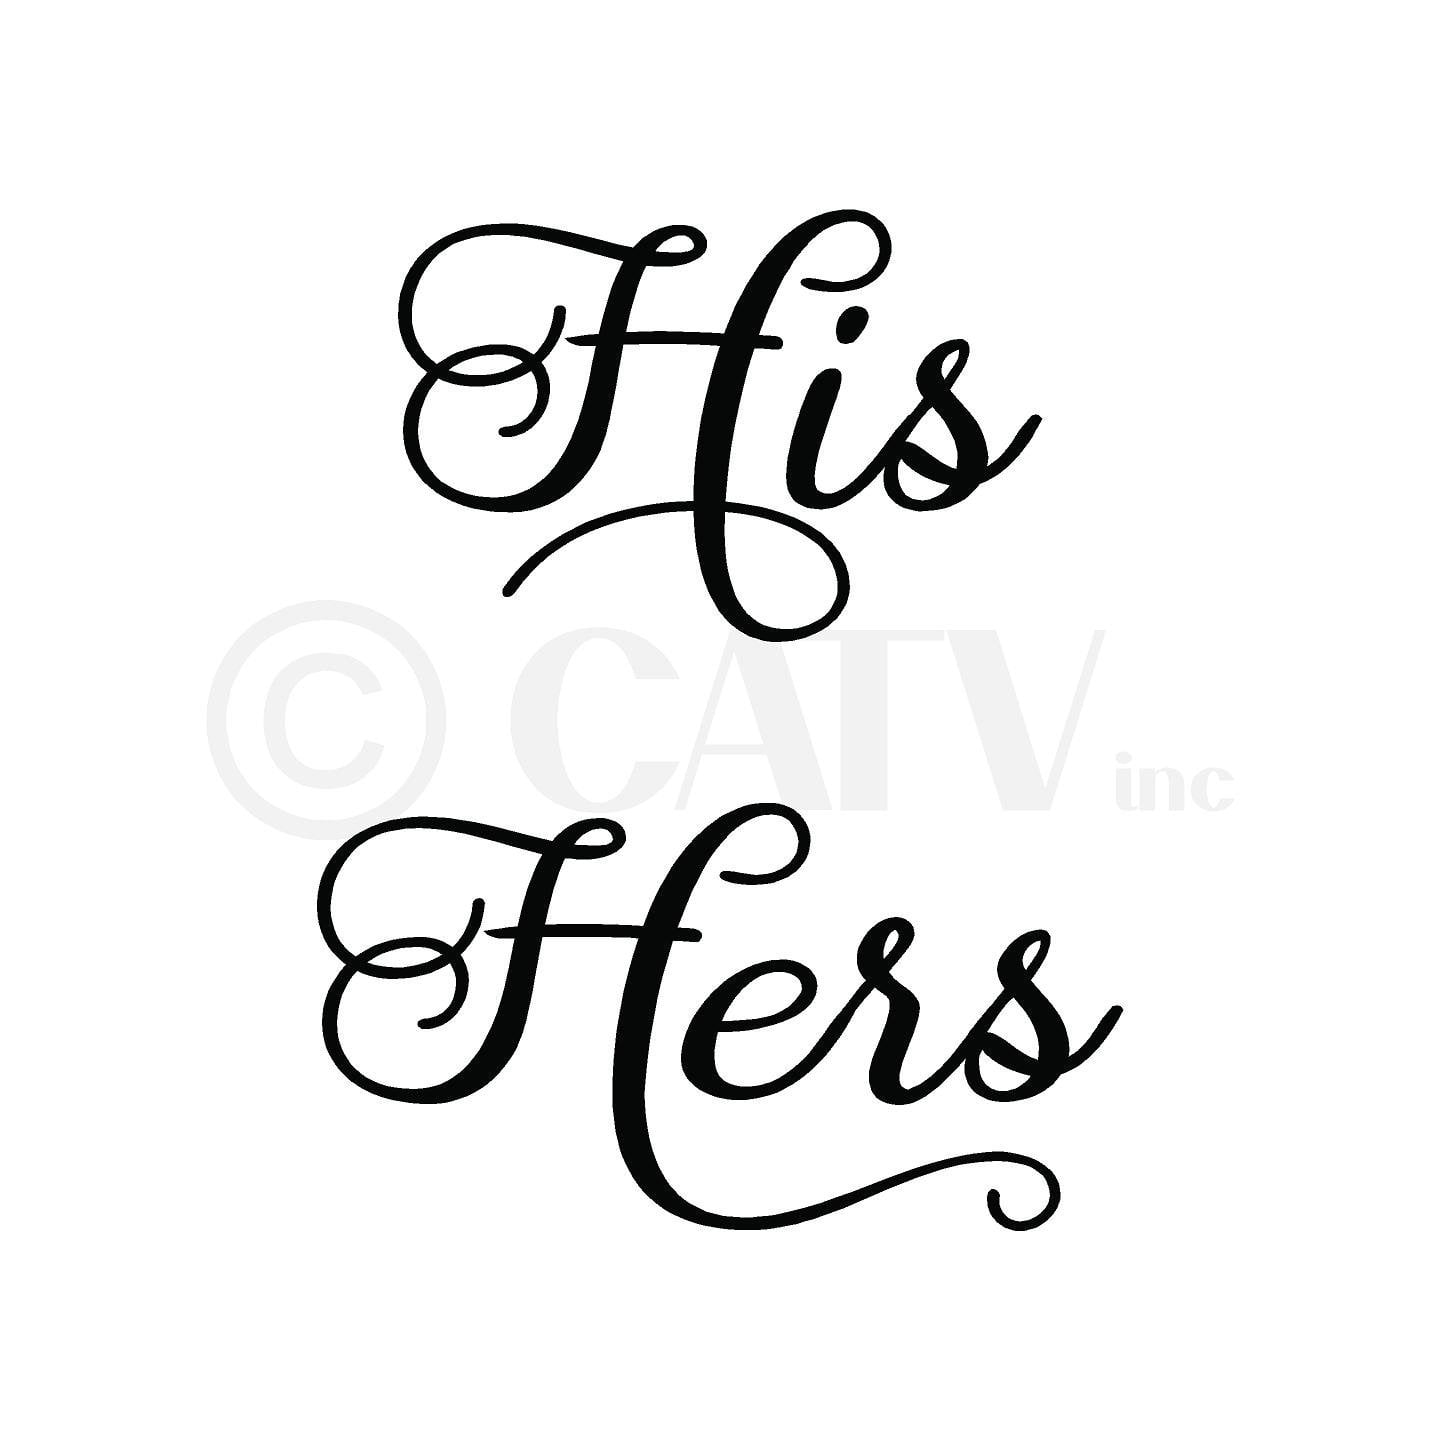 Black, 3.5H x 5L; 3.5H x 6.5L His and Hers Vinyl Lettering Wall Decal Stickers